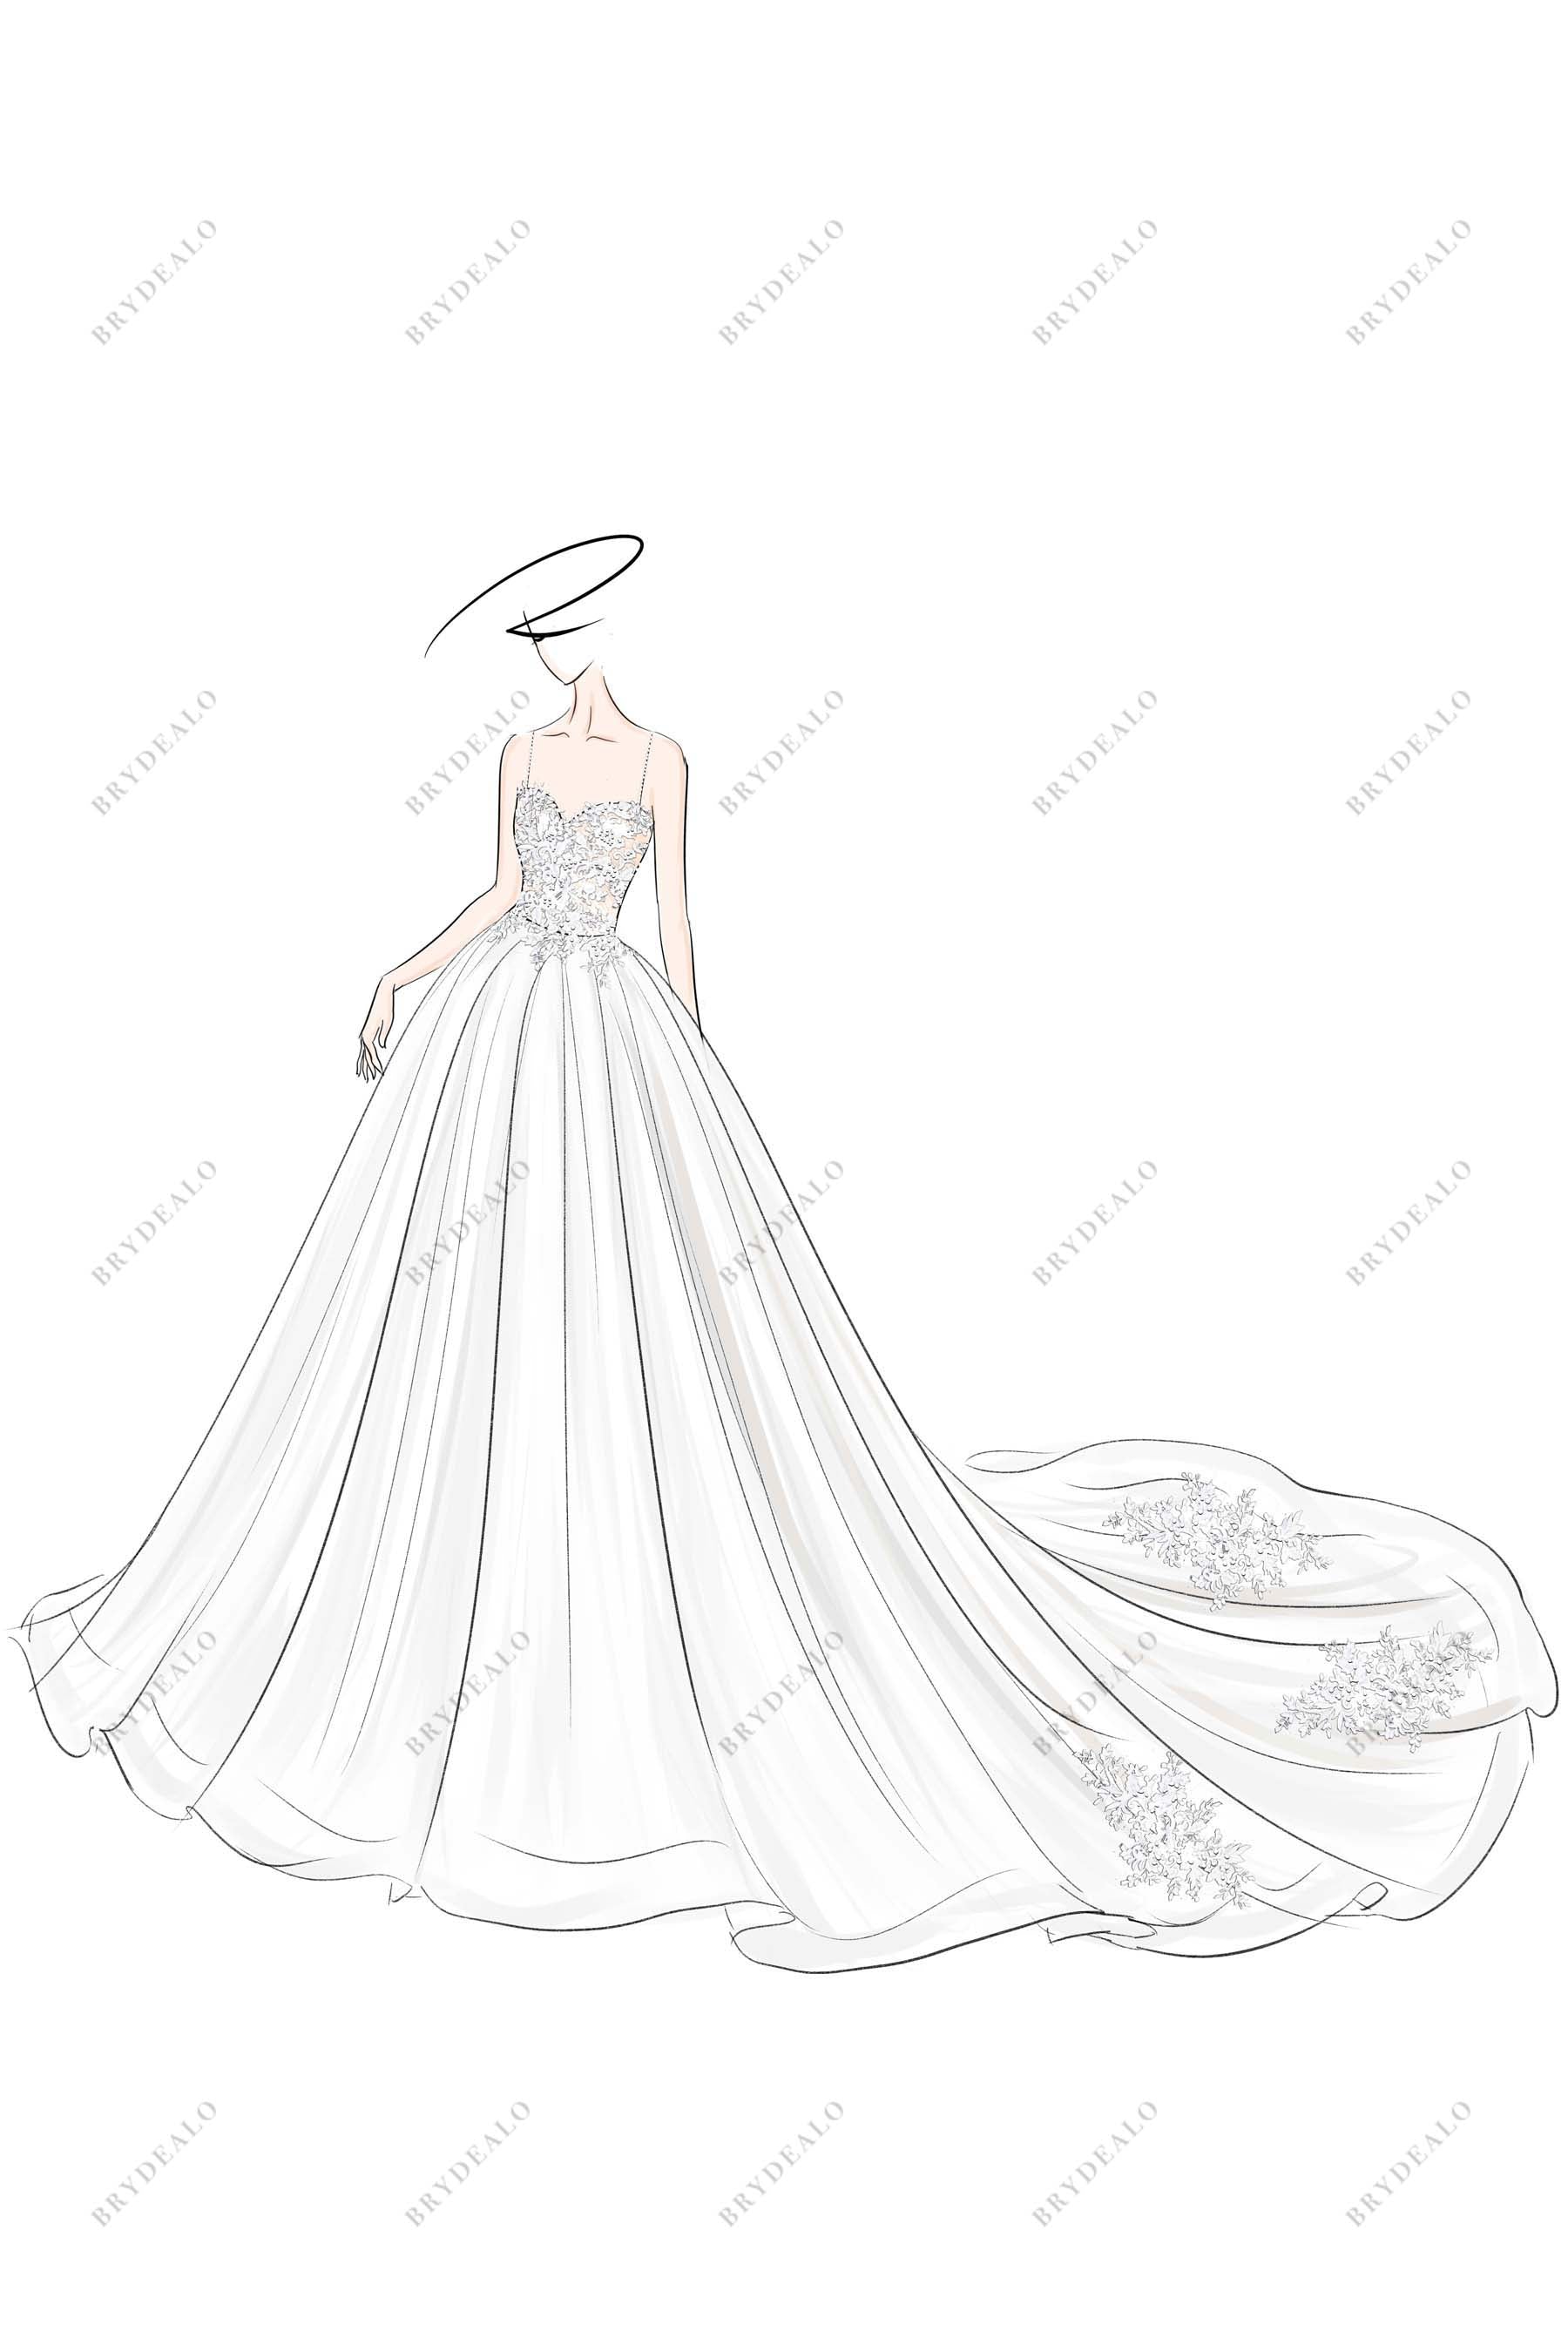 Sweetheart Lace Corset Designer Wedding Ball Gown Sketch